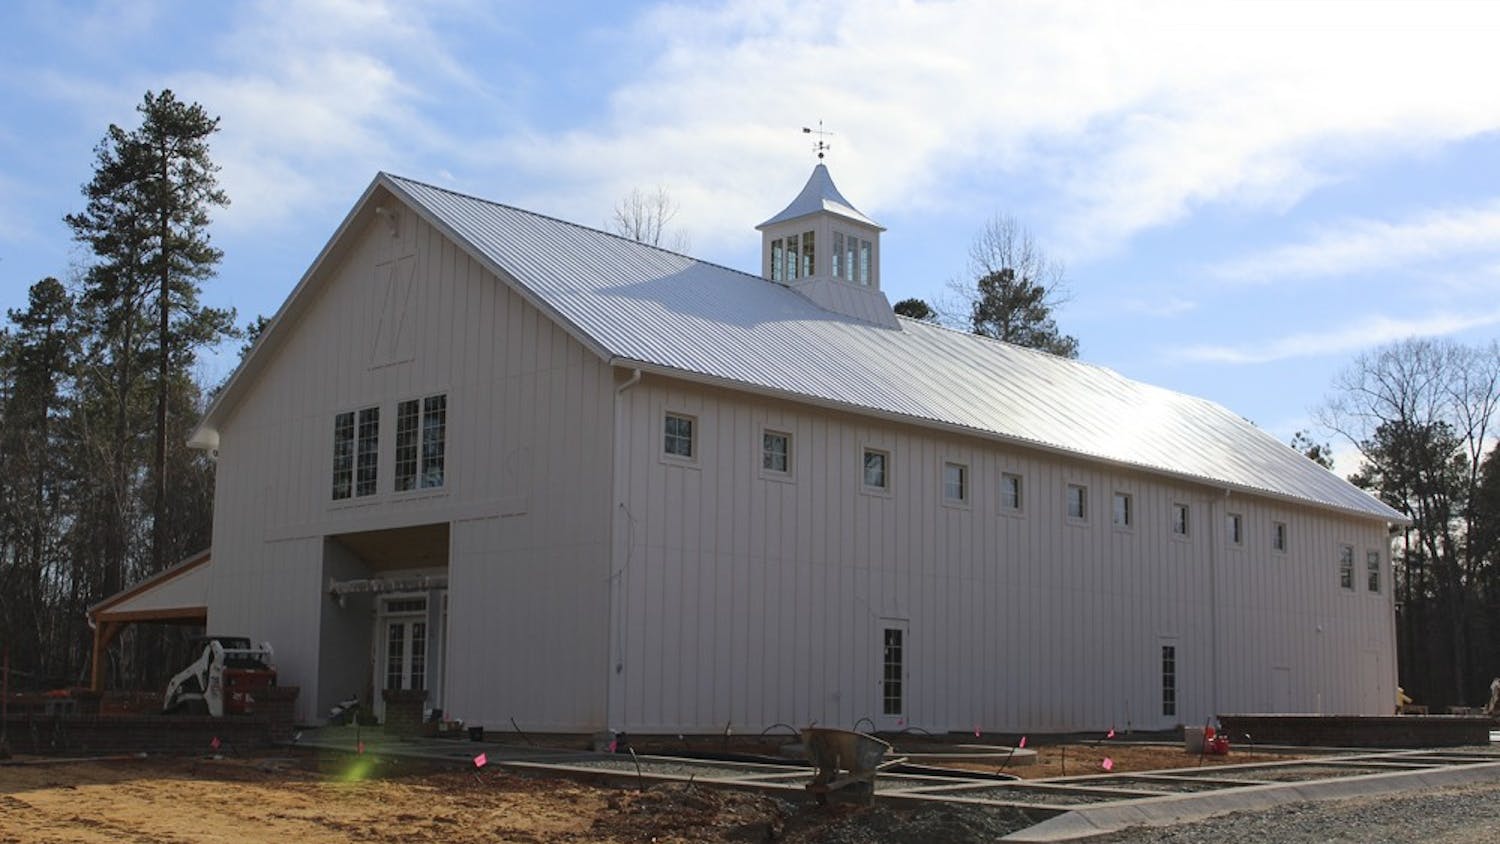 A party barn located in Orange County is currently under construction. It was built to host weddings but the Orange County Board of Adjustments has prevented weddings from being held there due to zoning purposes.